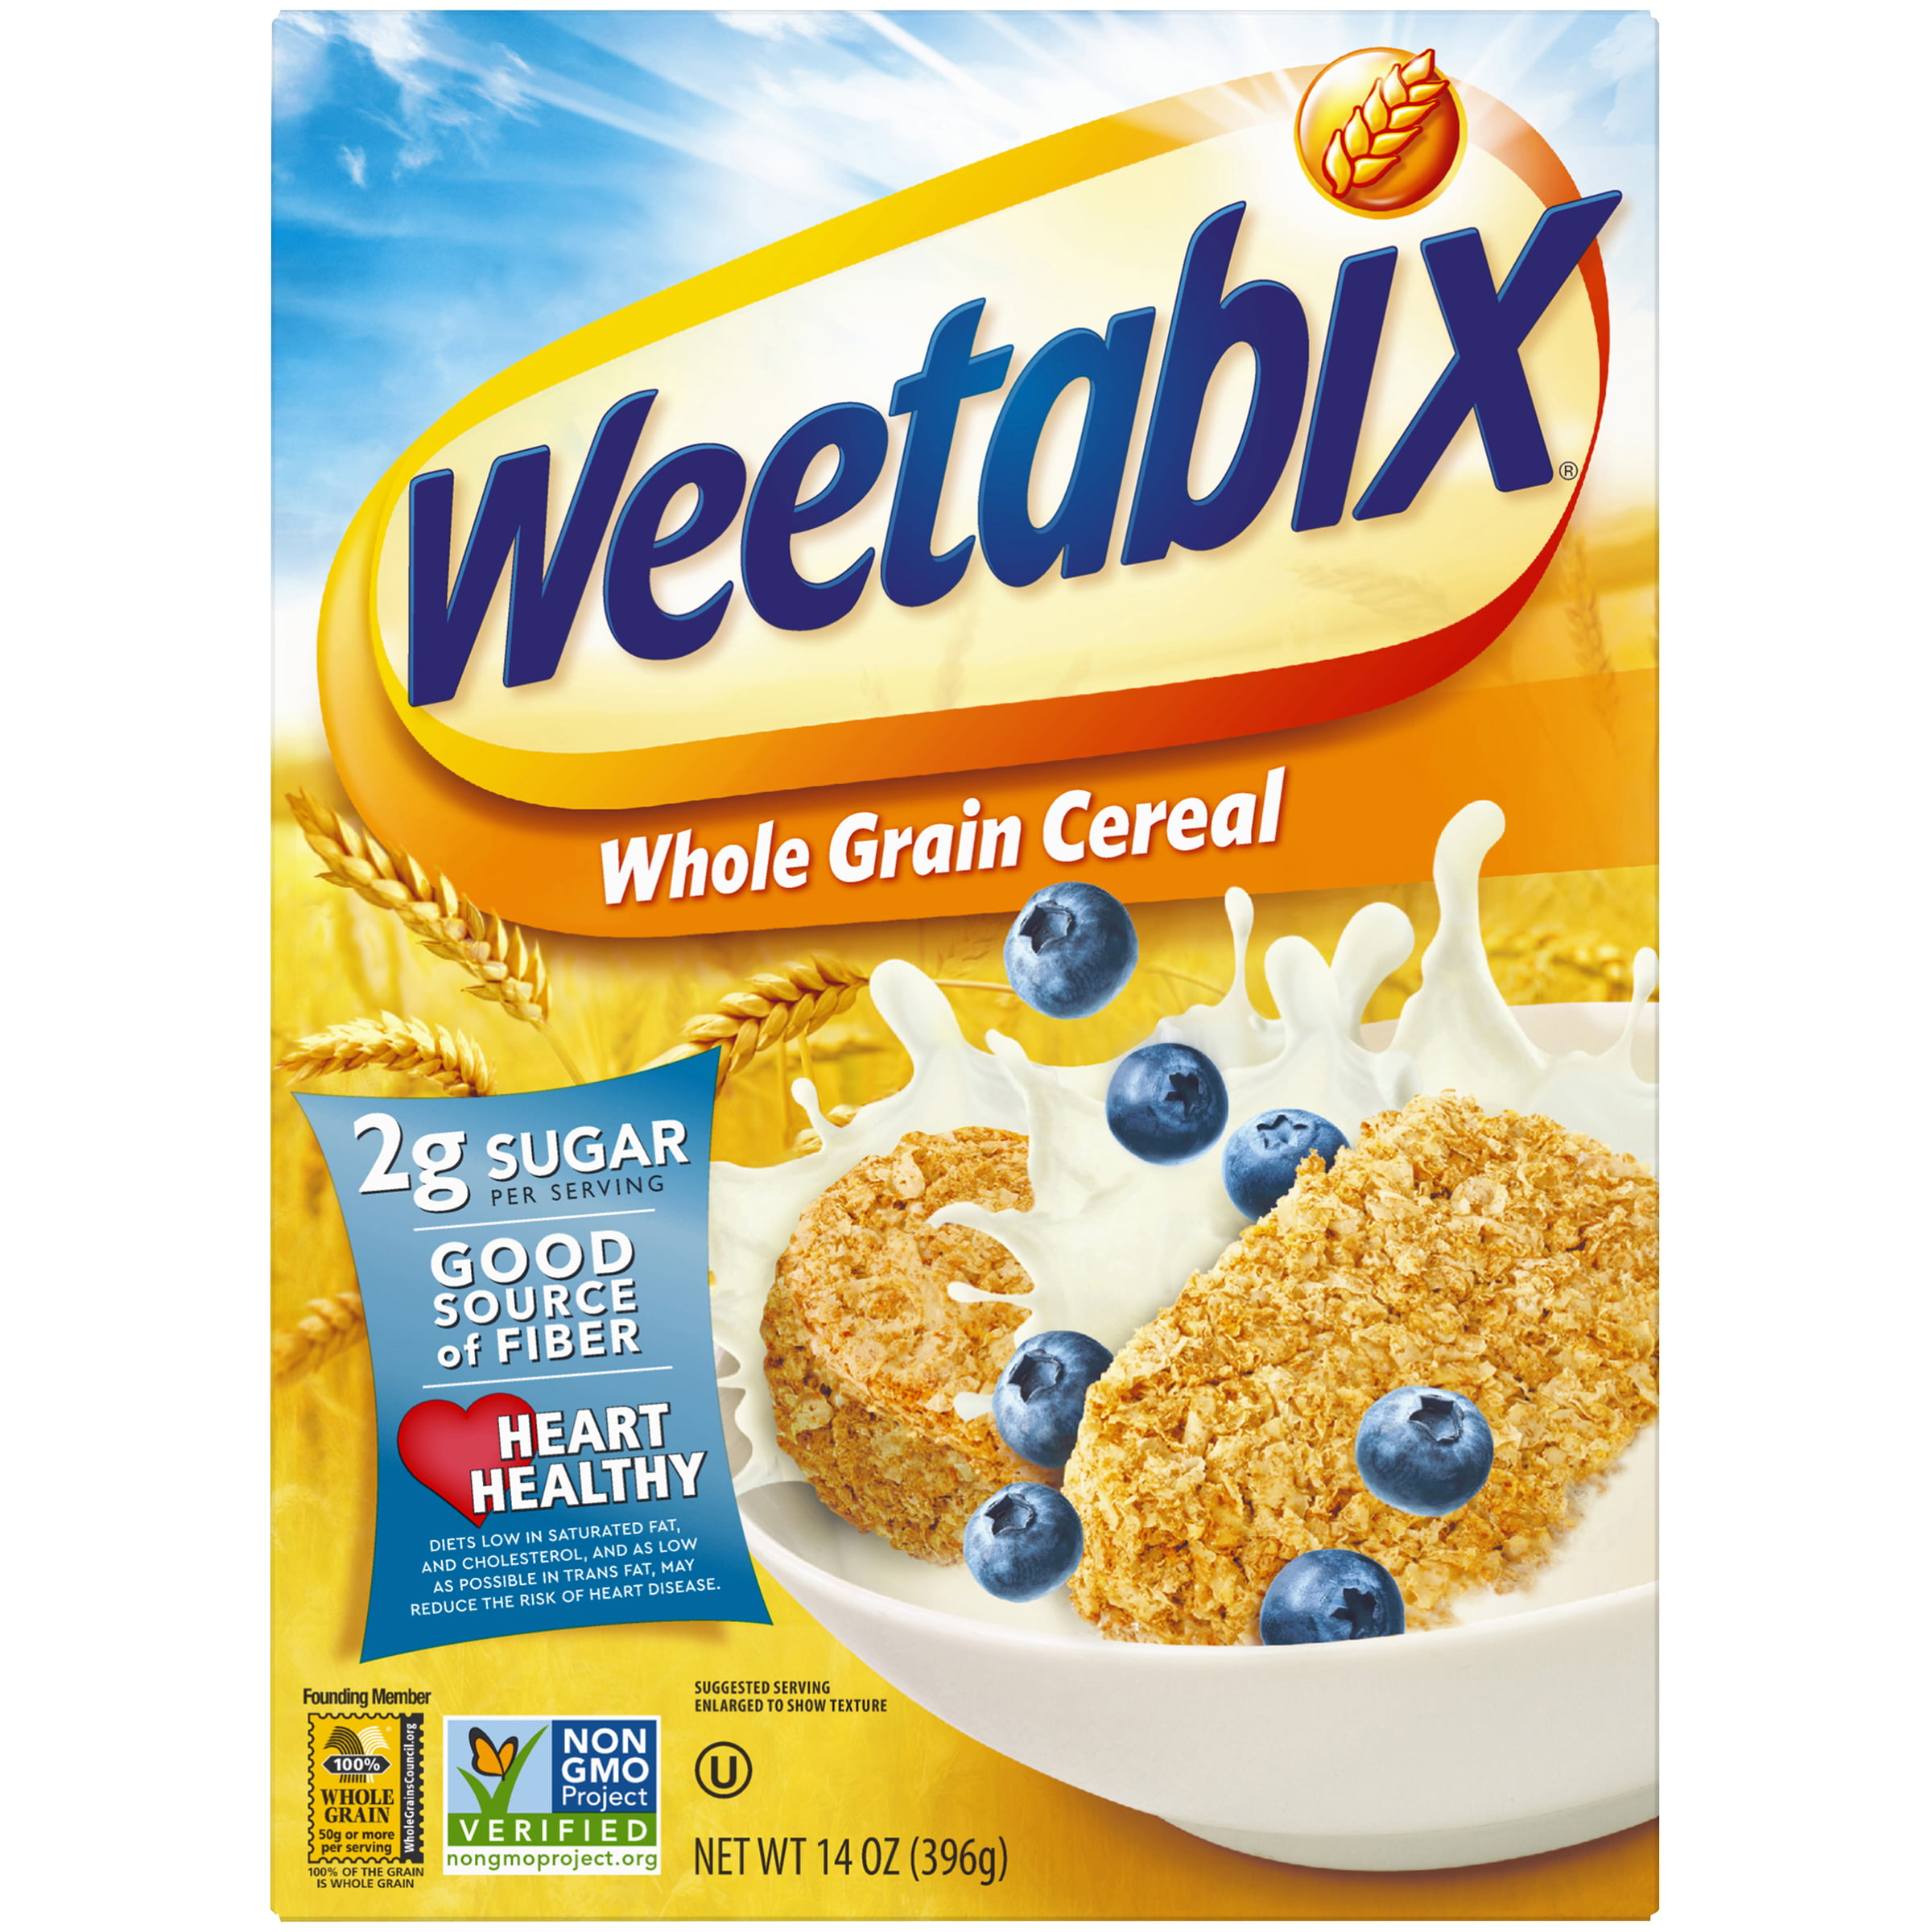 Pick the cards you need British Birds Excellent. Weetabix 